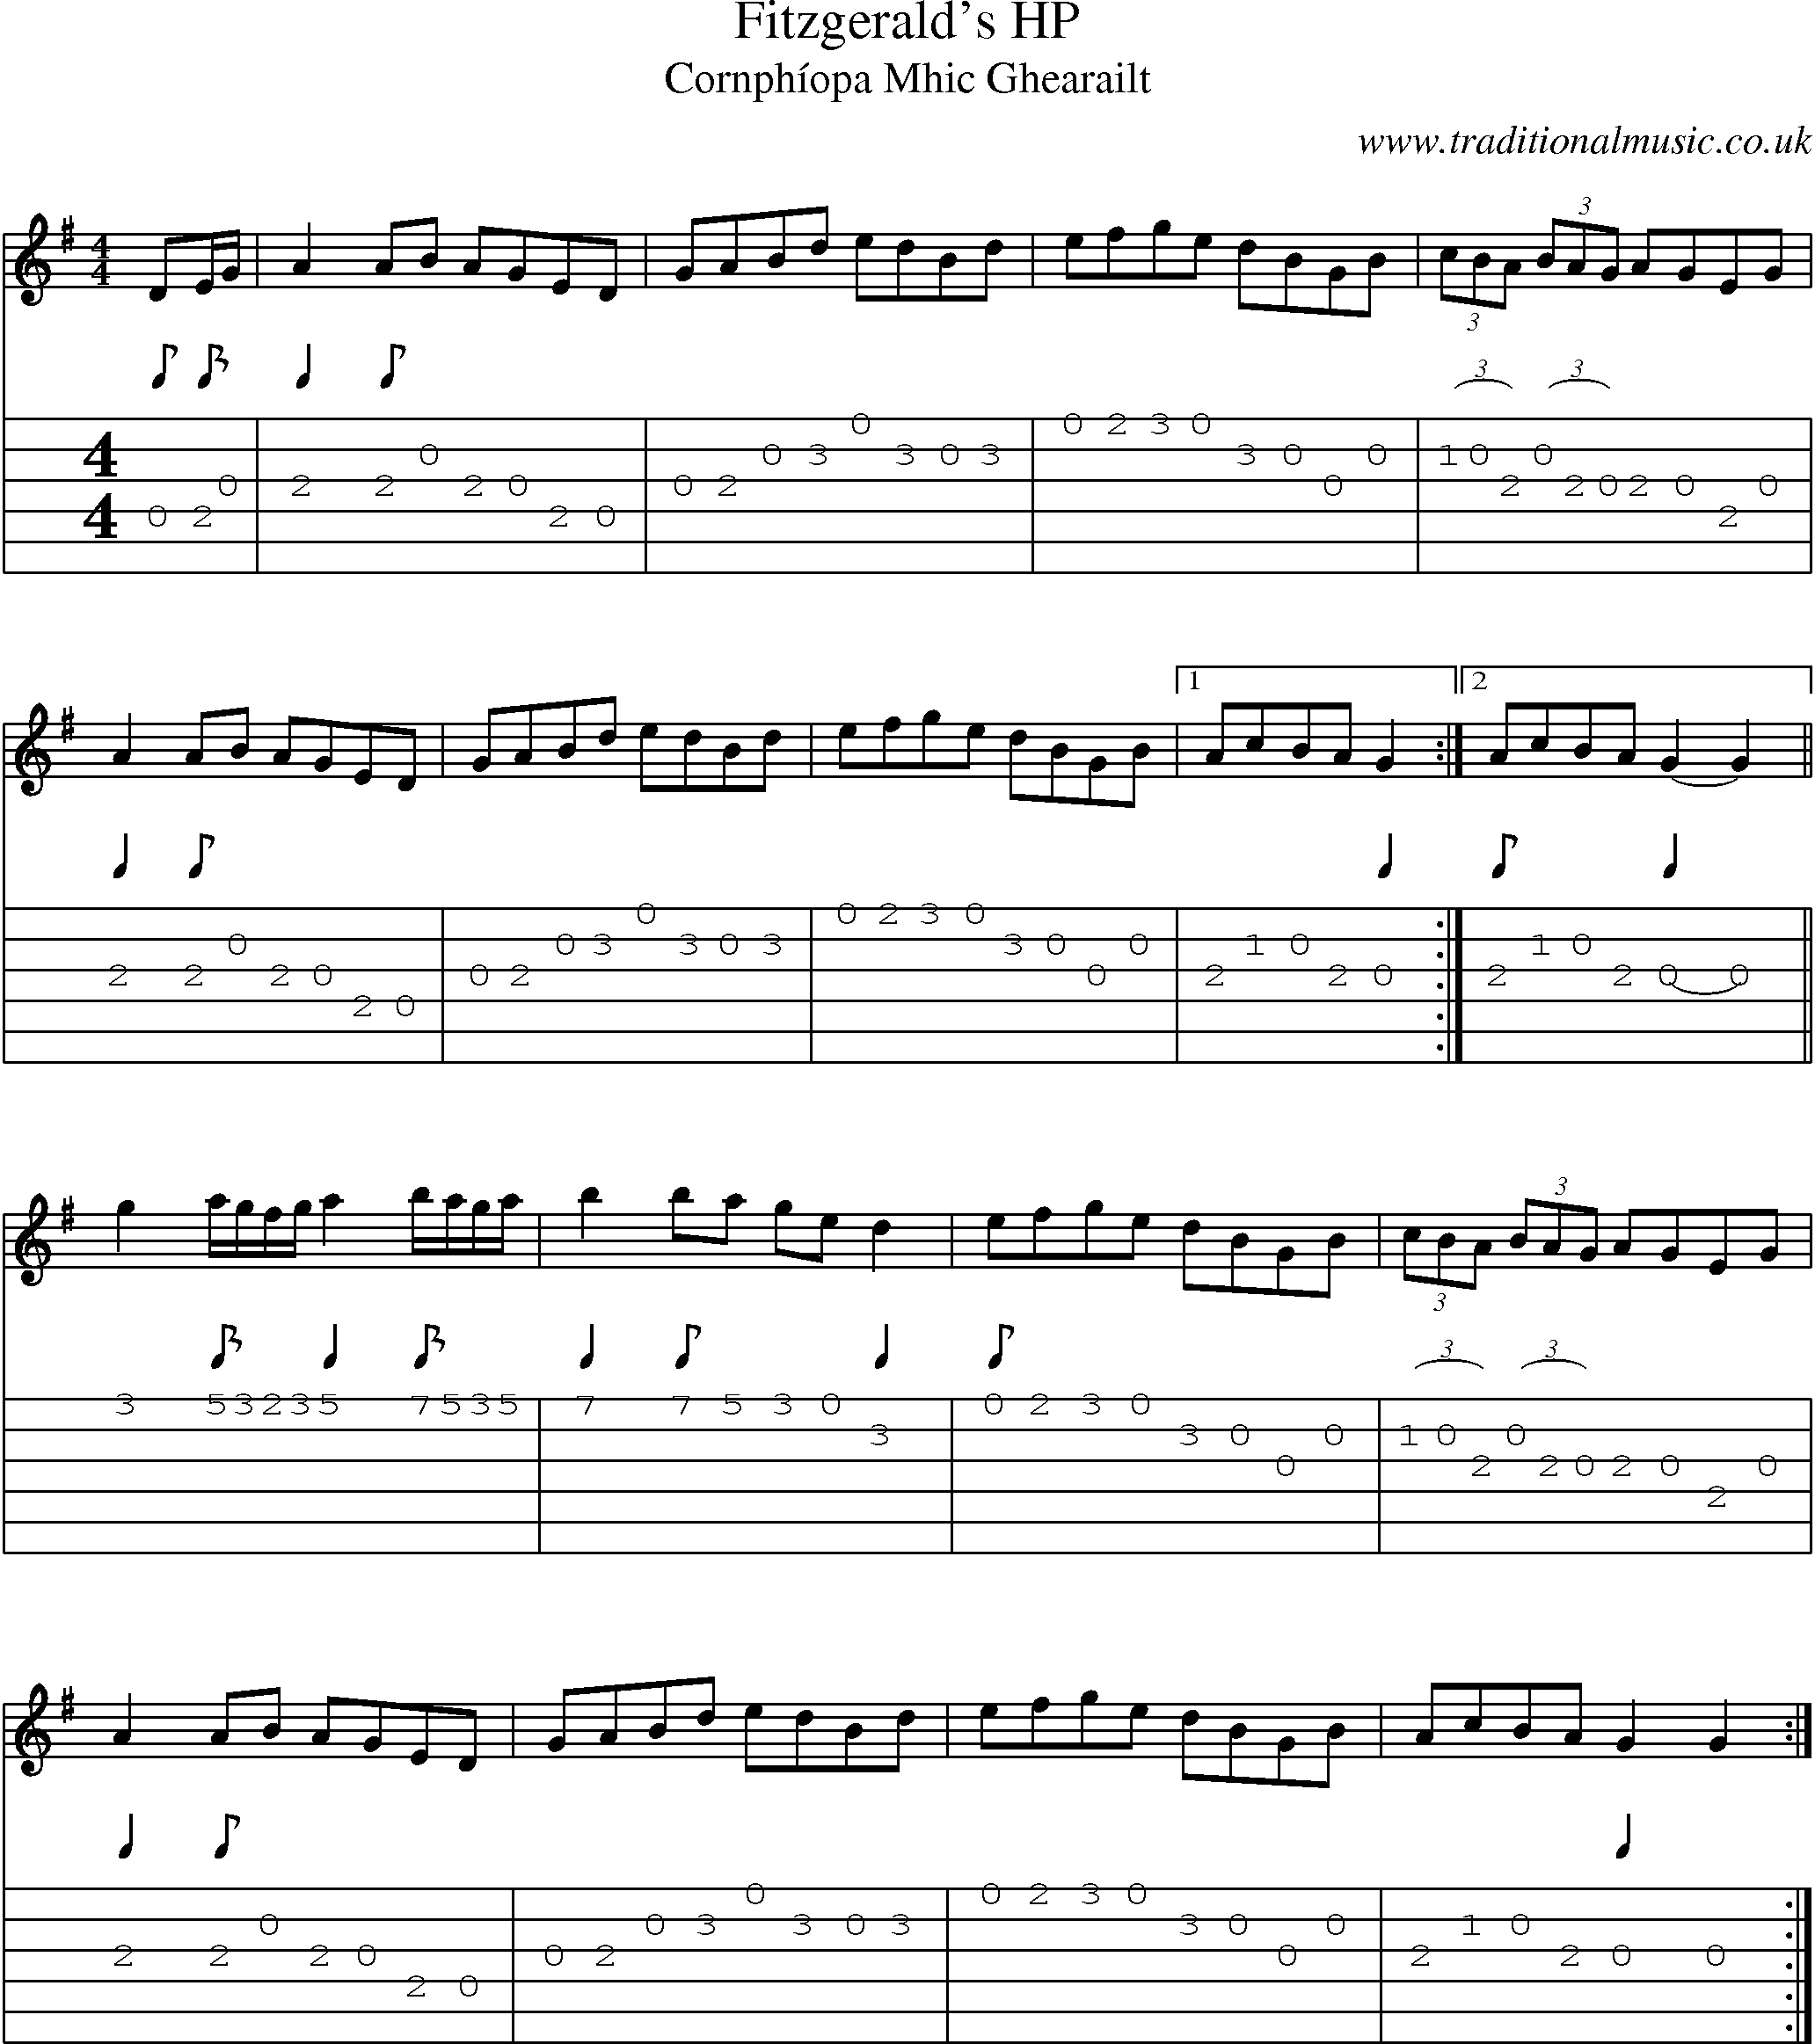 Music Score and Guitar Tabs for Fitzgeralds 